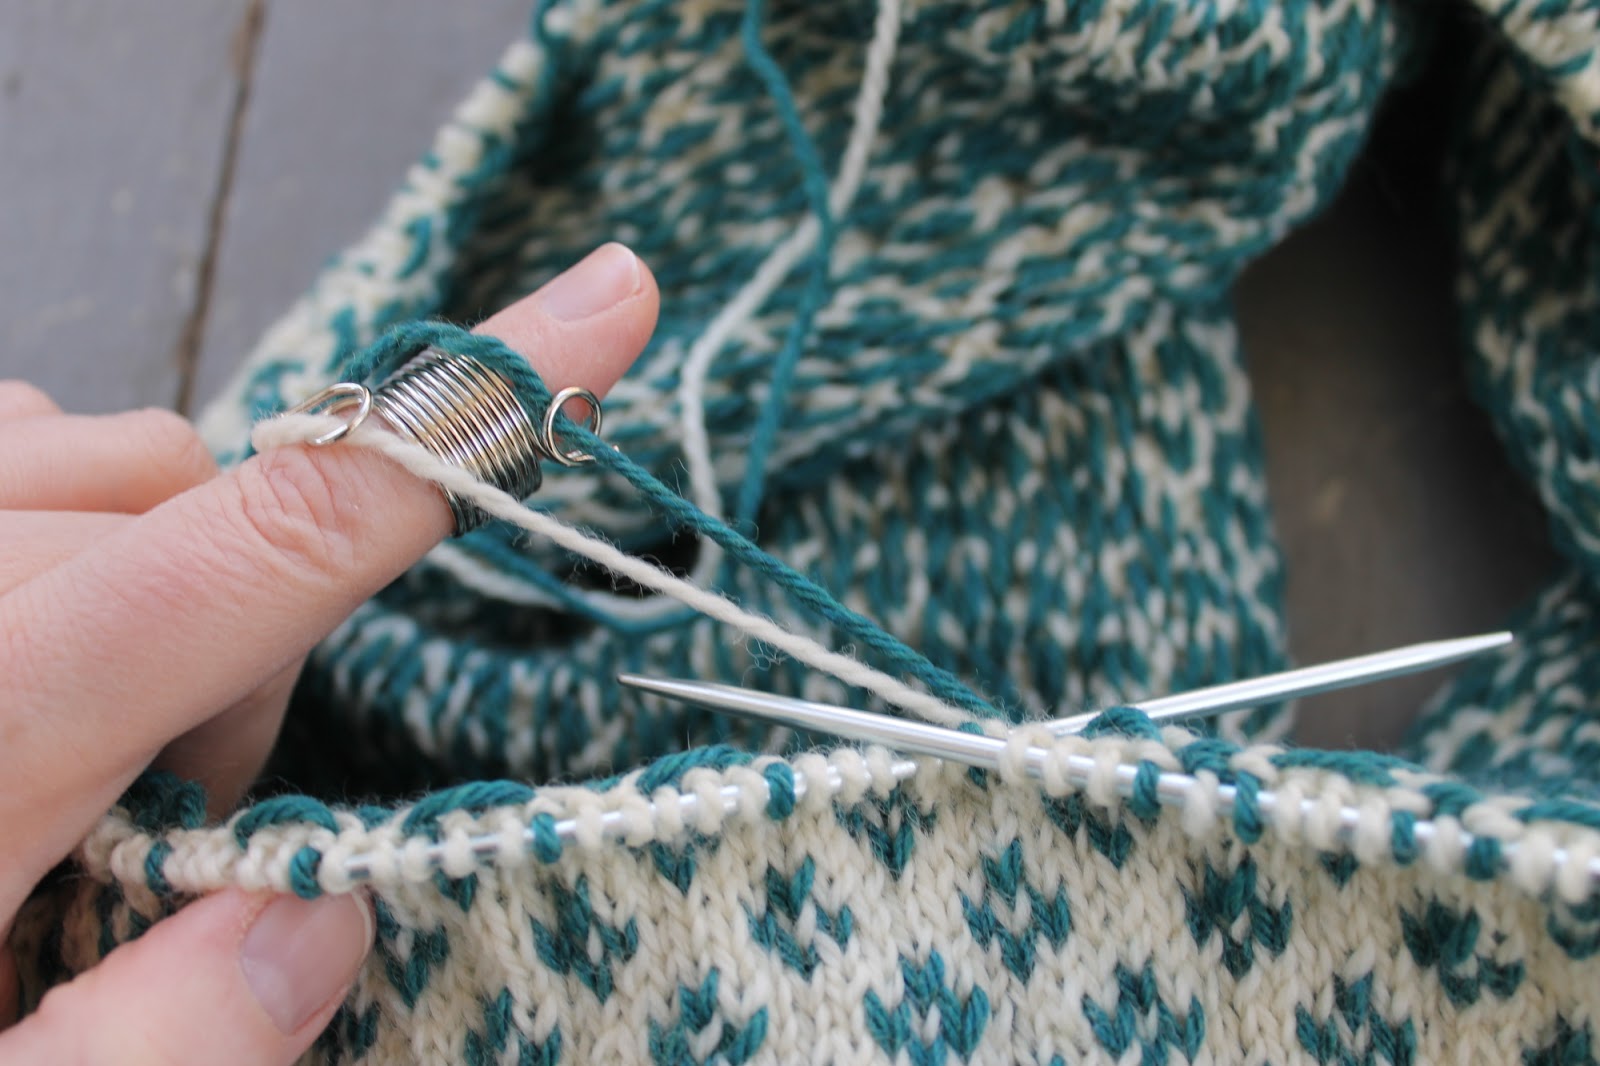 I love this ring thingy for colorwork! (aka Norwegian knitting thimble) : r/ knitting